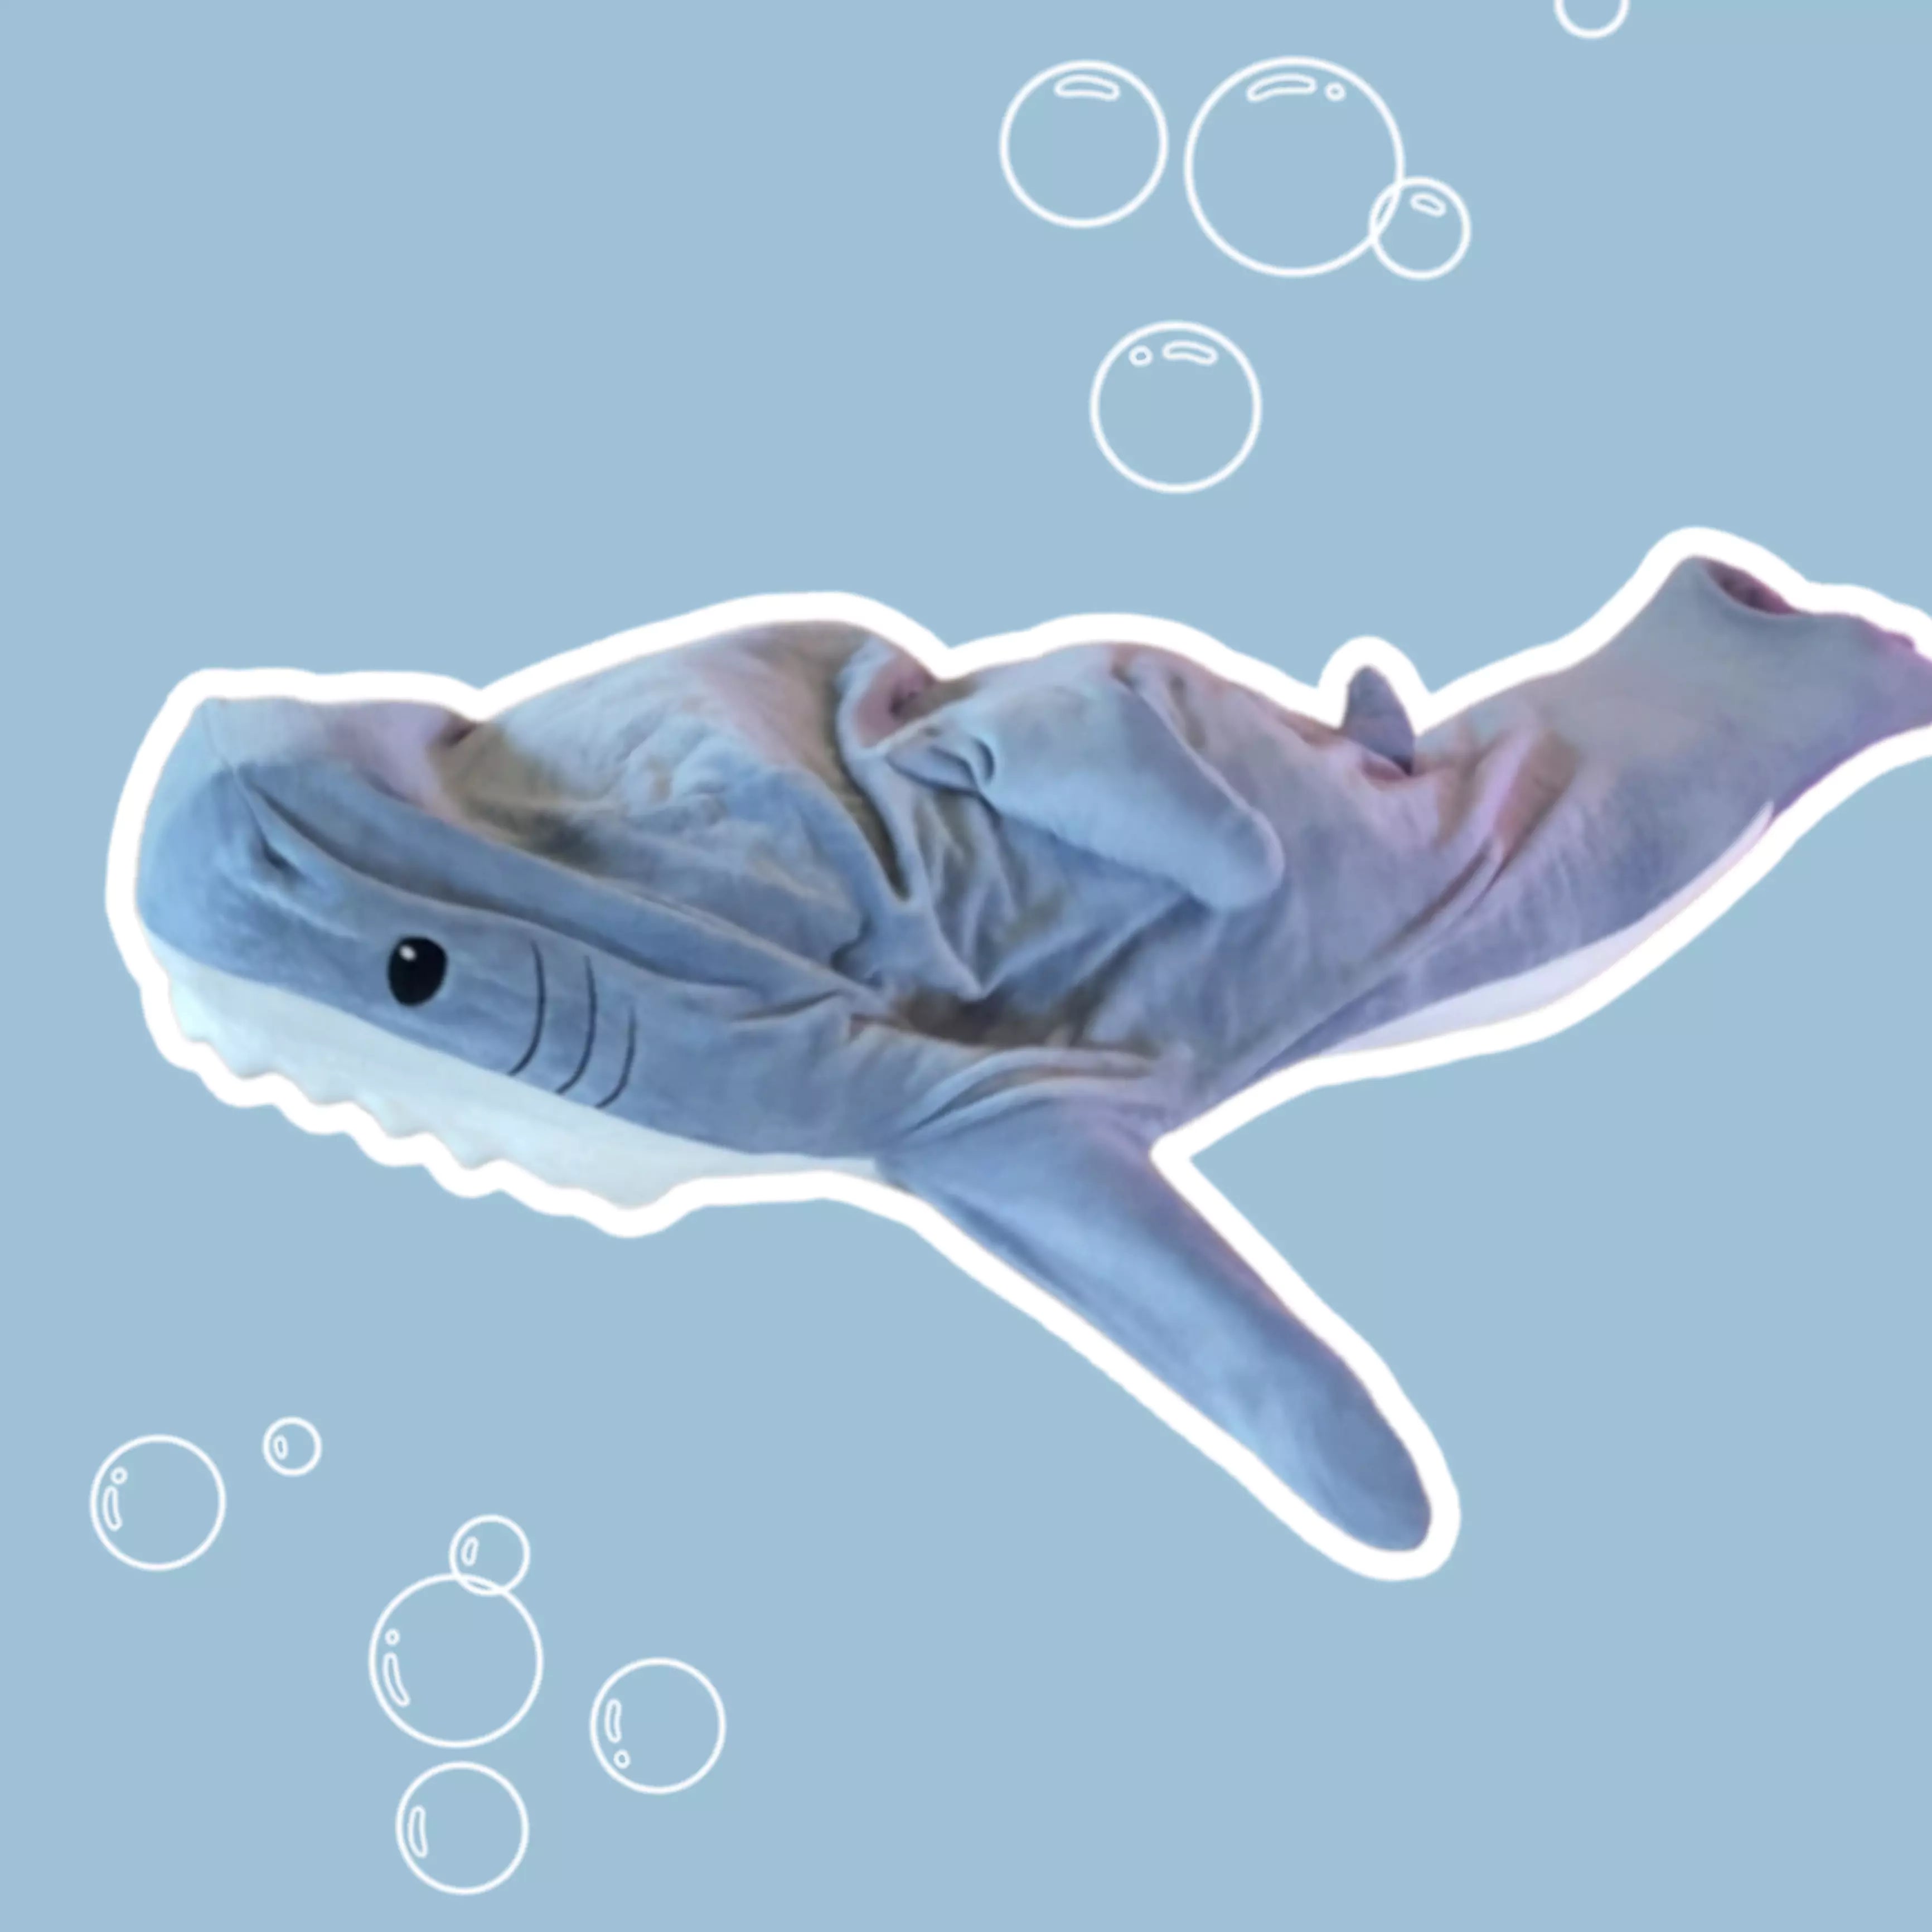 Shark Blankie – Becomes the World’s Coziest, Comfiest and Cutest Shark!